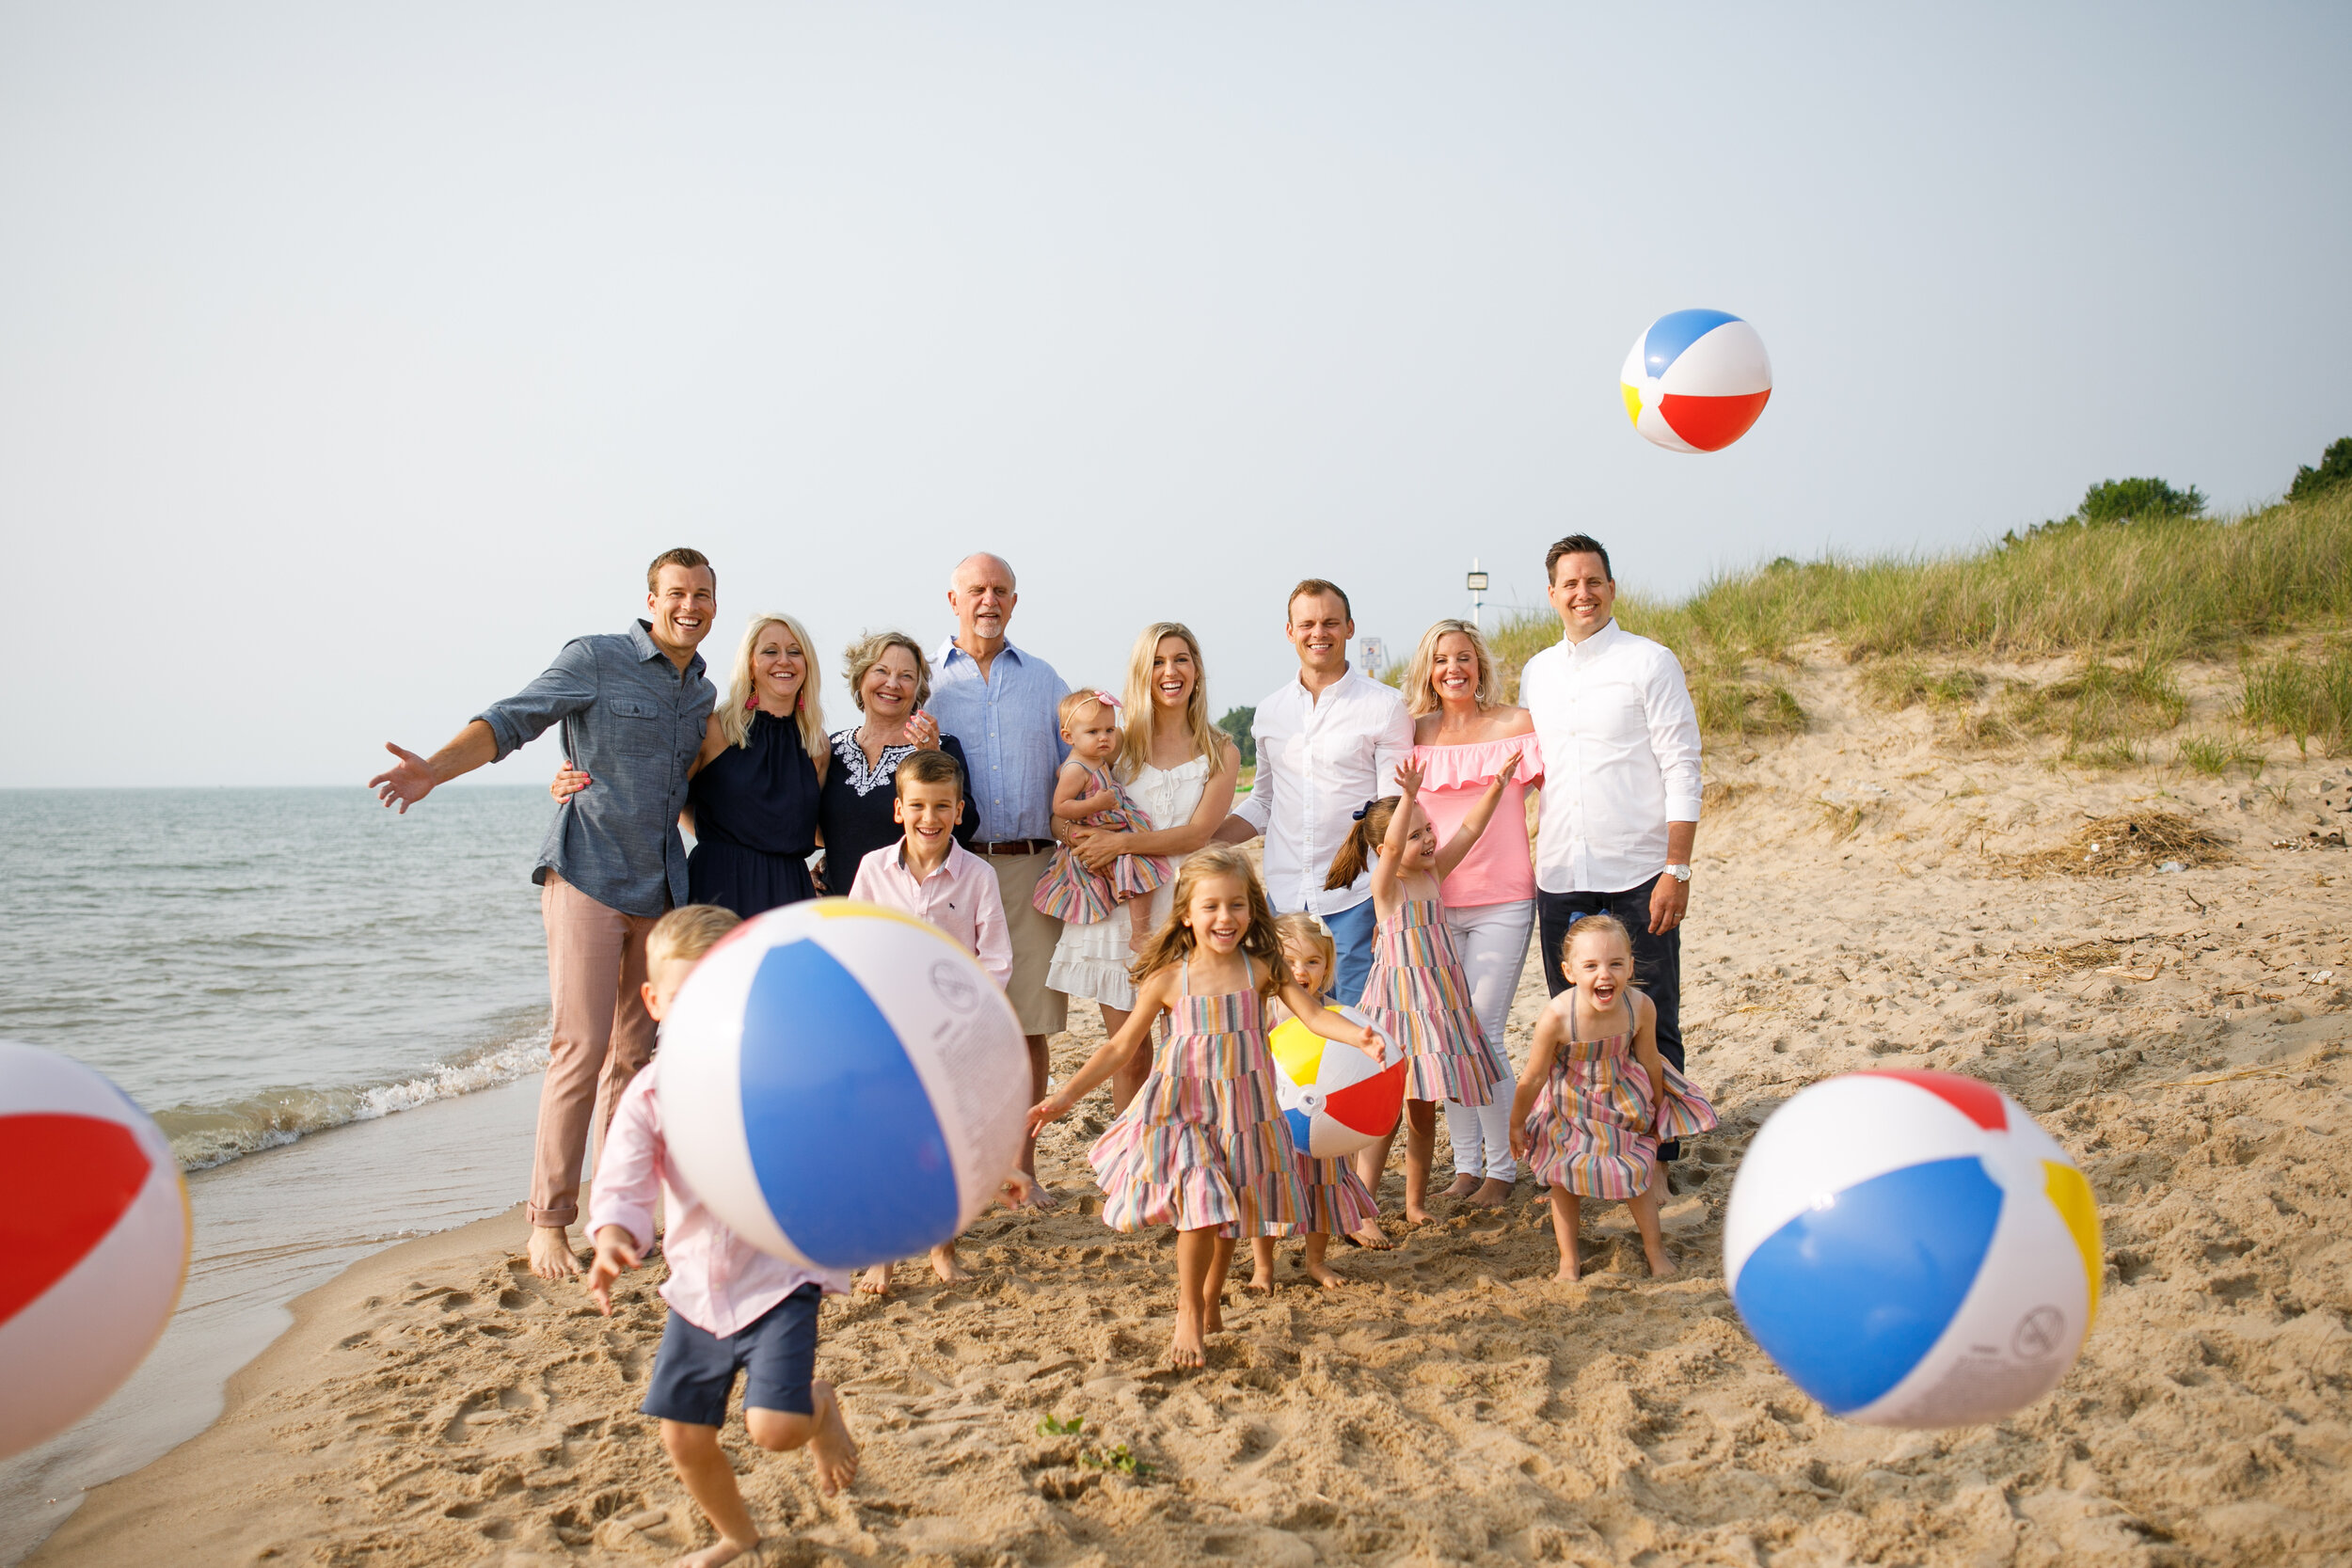 south haven family session - south haven family photographer - j darling photo019.jpg